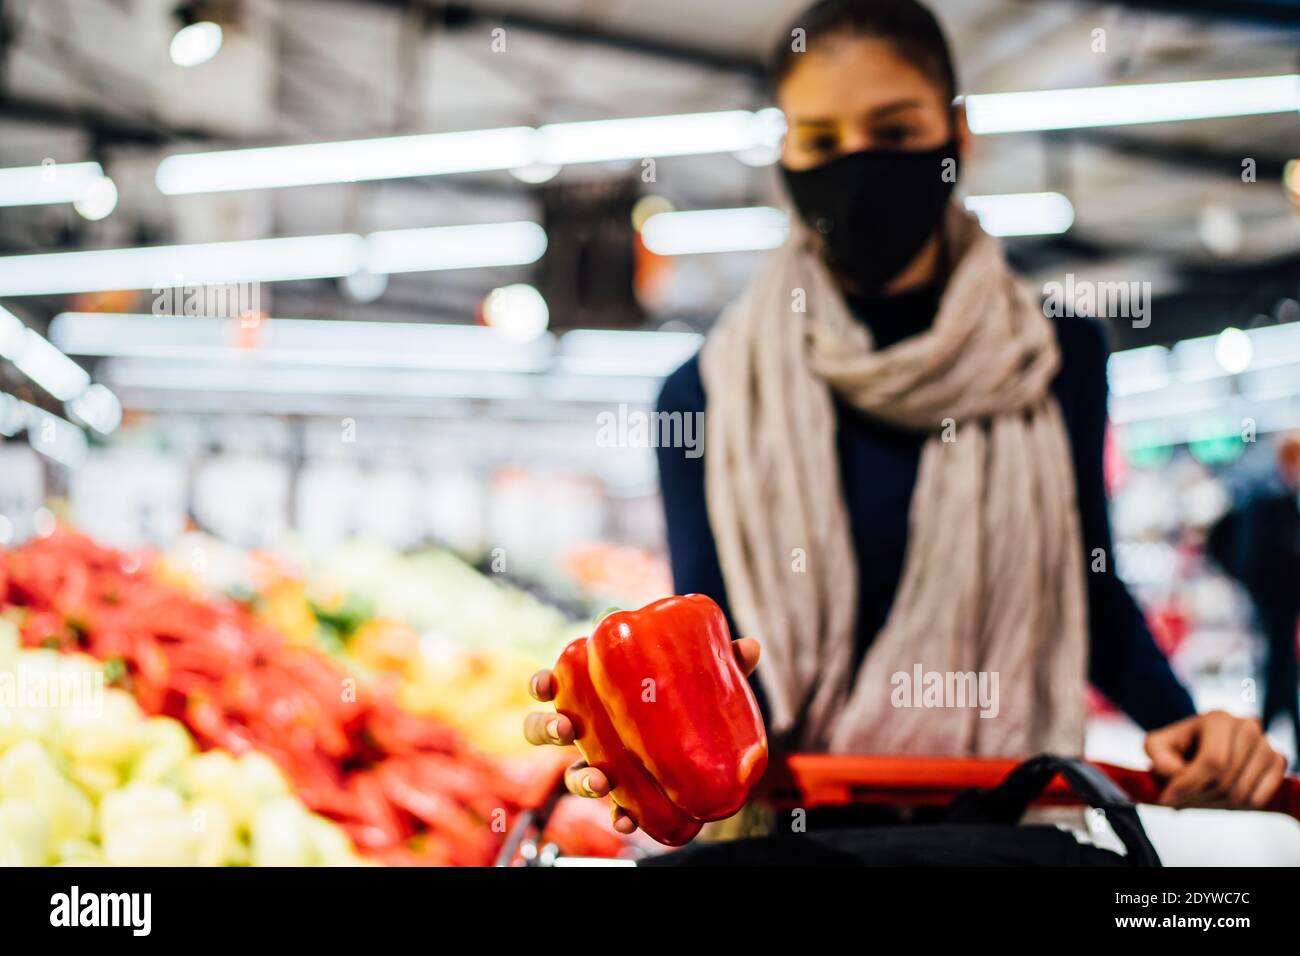 Young woman wearing protective face mask shopping in a supermarket,buying organic produce and ingredients.Eating healthy food during coronavirus COVID Stock Photo